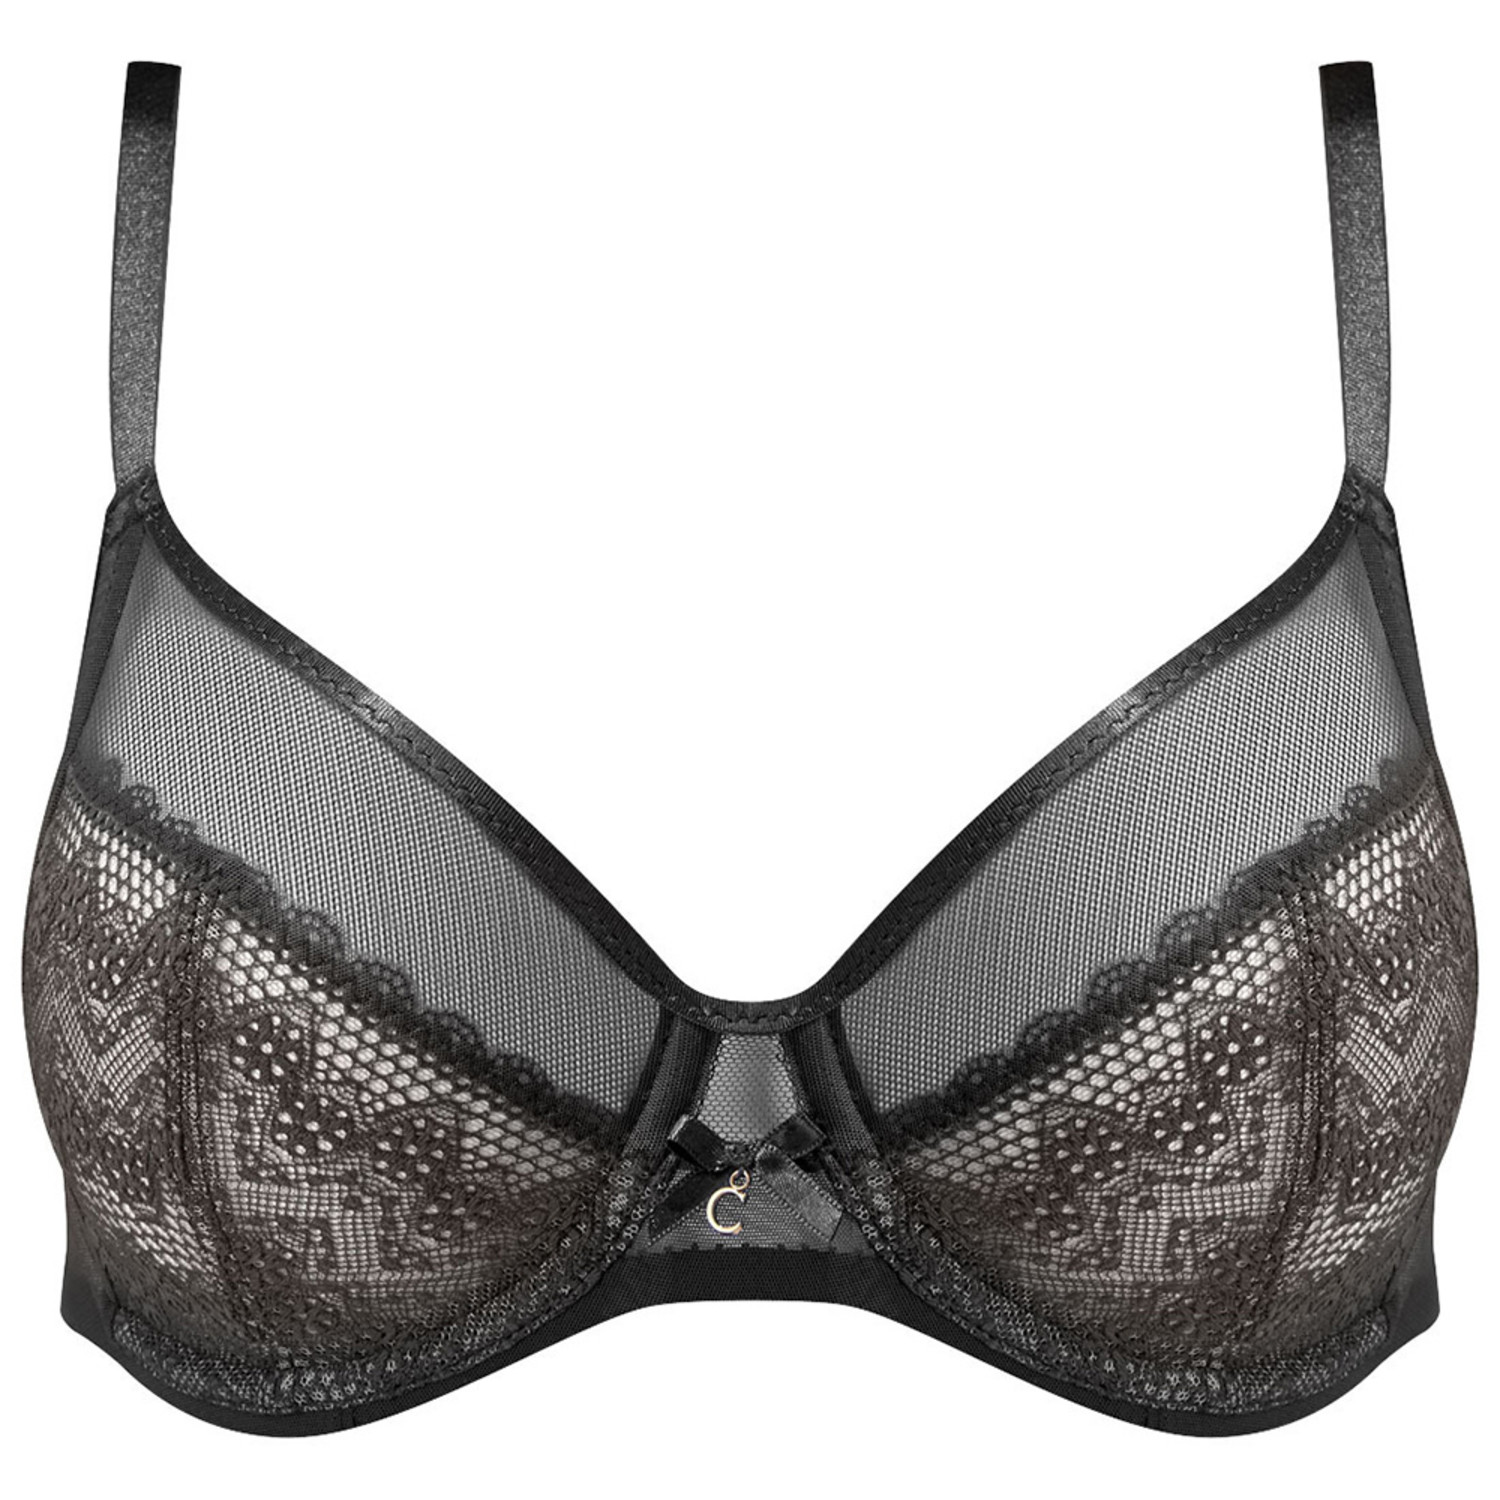 Revele Moi 3 Part Cup 1571 - Lace & Day